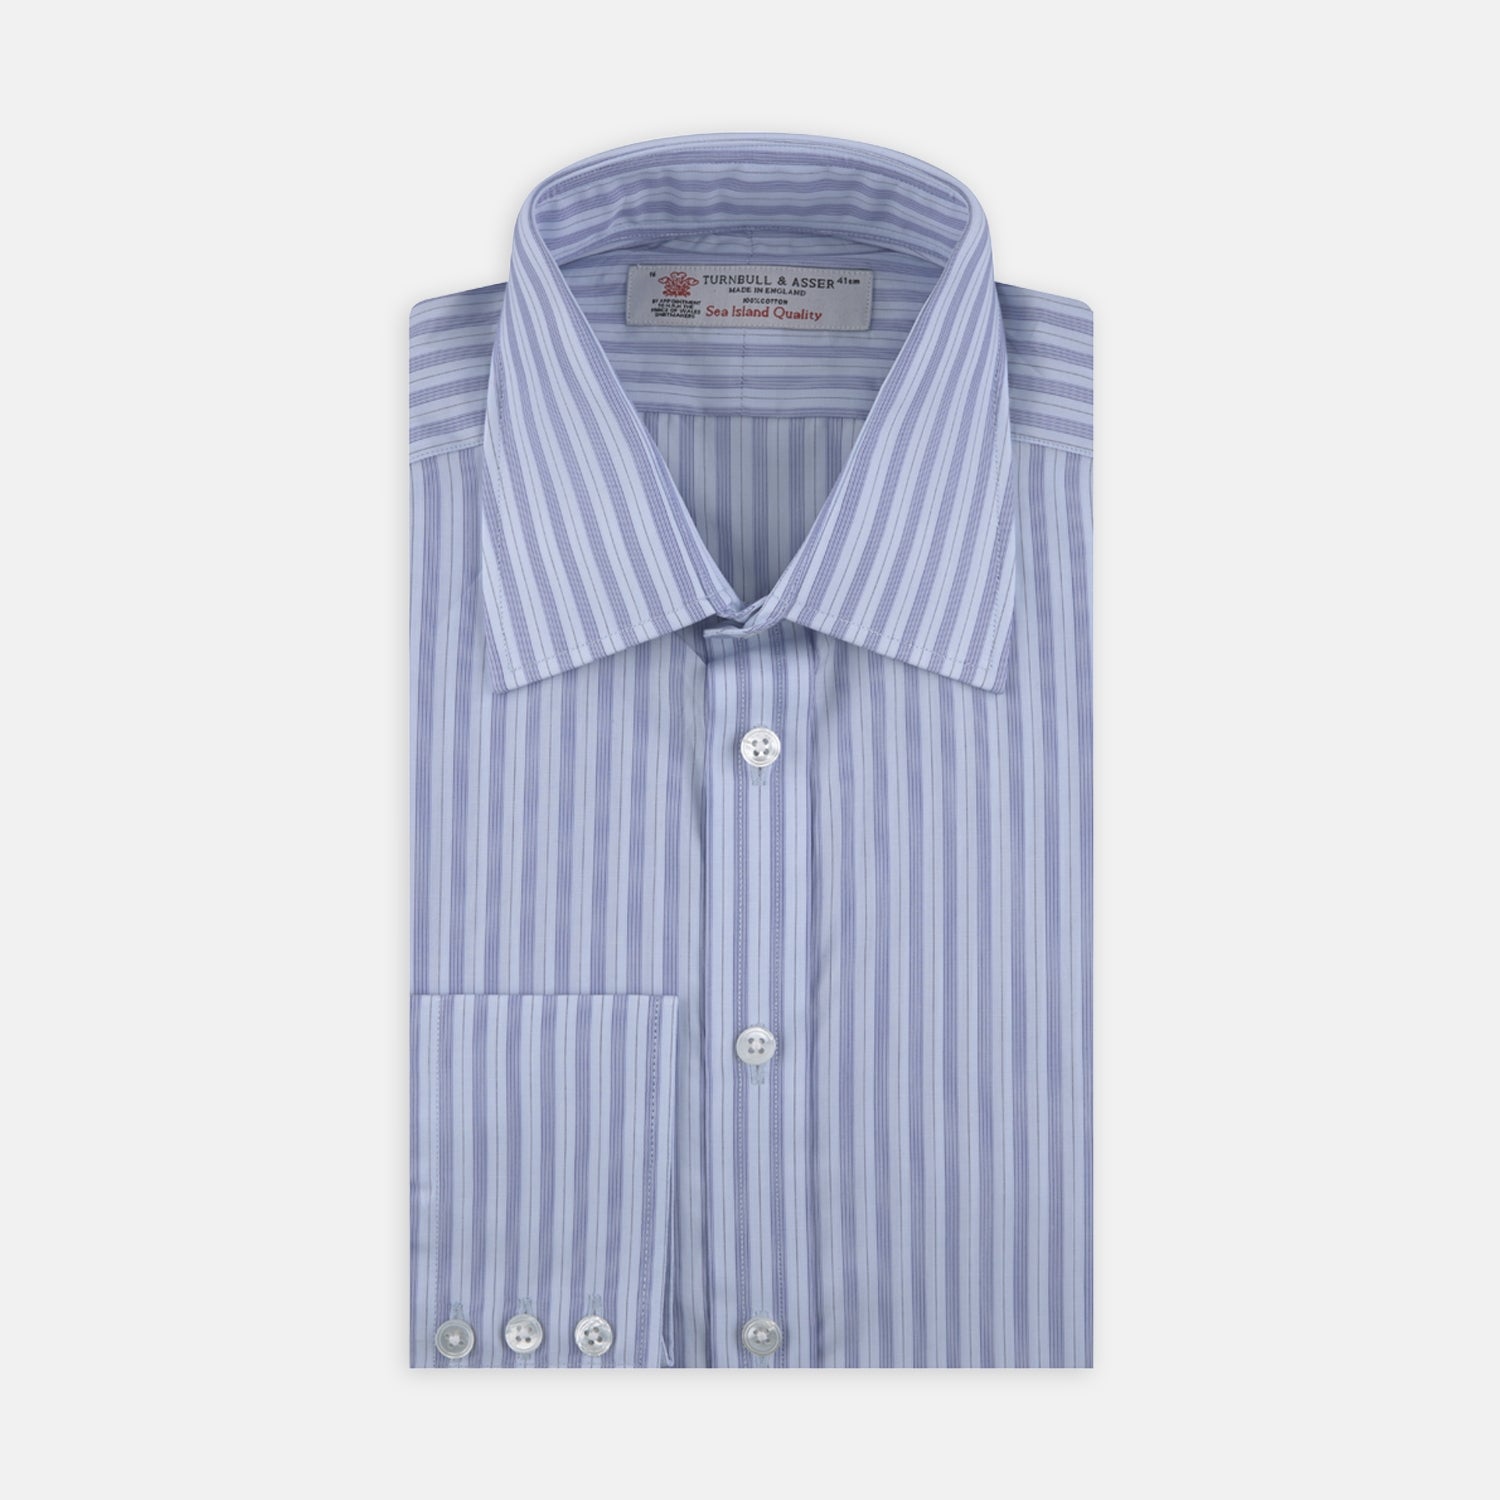 Blue Brush Stripe Sea Island Quality Cotton Shirt with T&A Collar and Button Cuffs